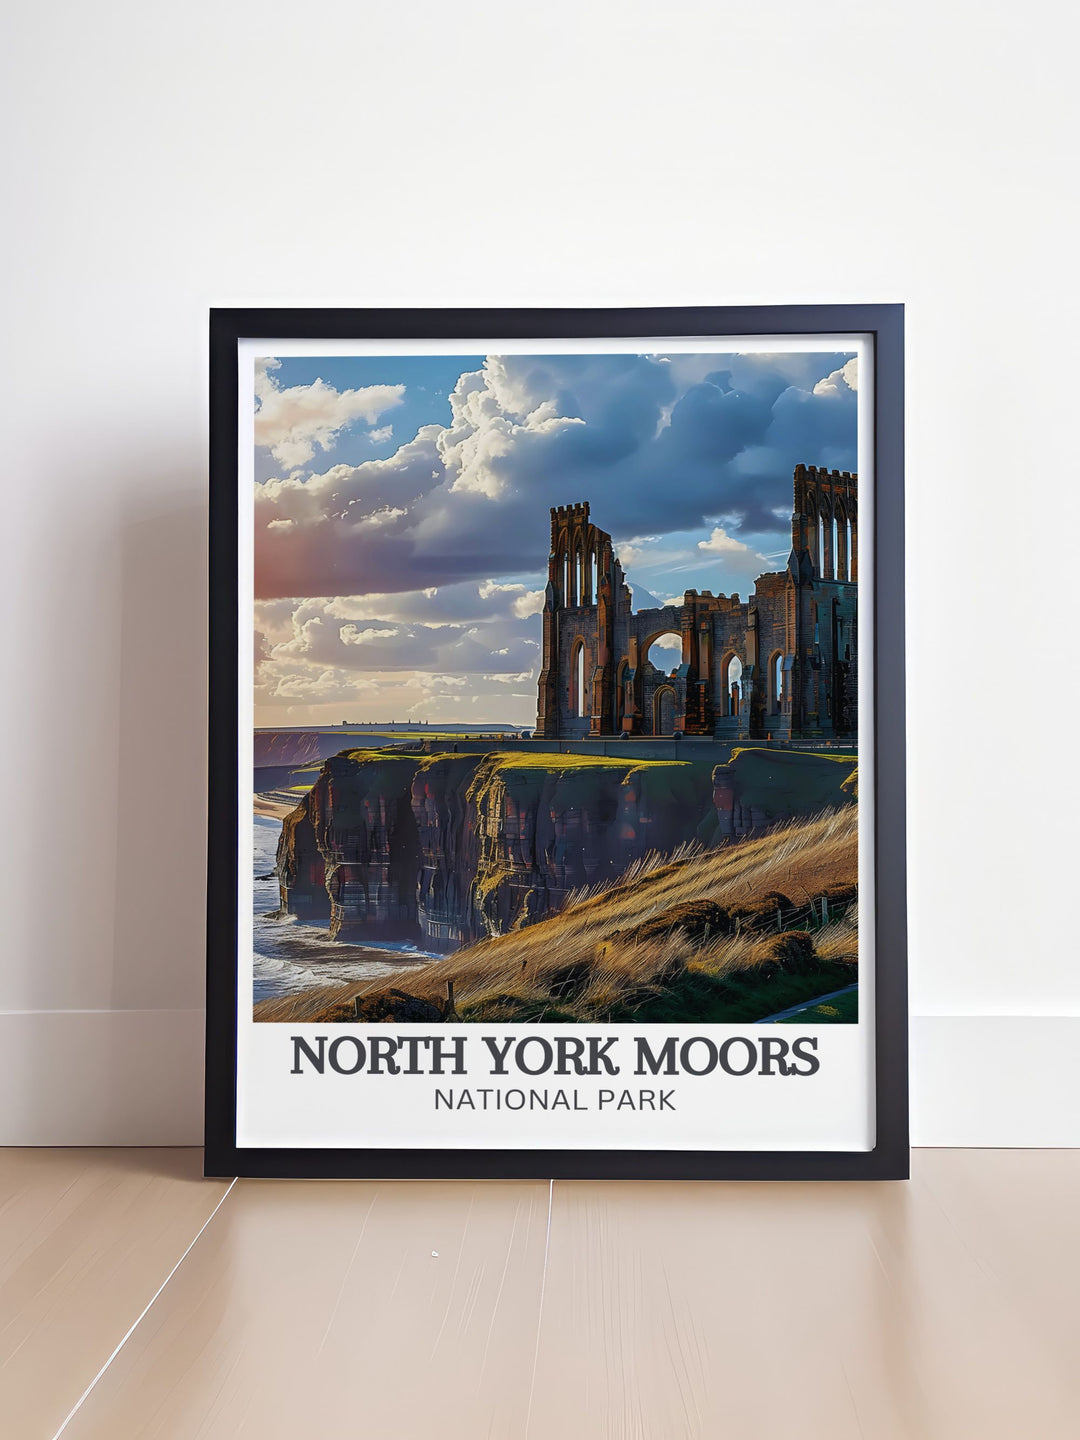 Discover the serene landscapes of North York Moors National Park through this exquisite travel poster, capturing the tranquil beauty and expansive vistas of this beloved Yorkshire destination.